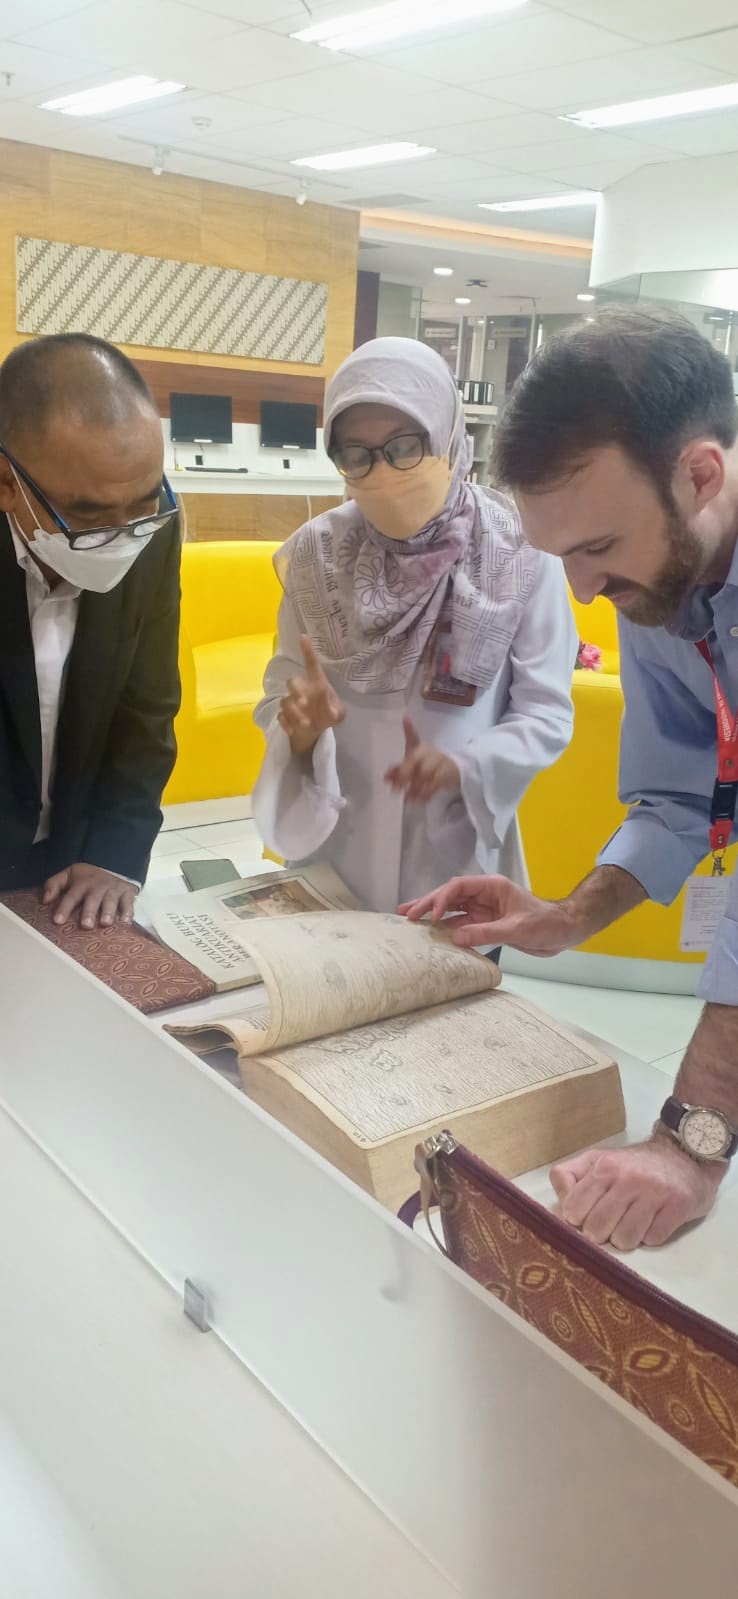 Examining 15th century legal texts at the Indonesian National Library Rare Book floor.